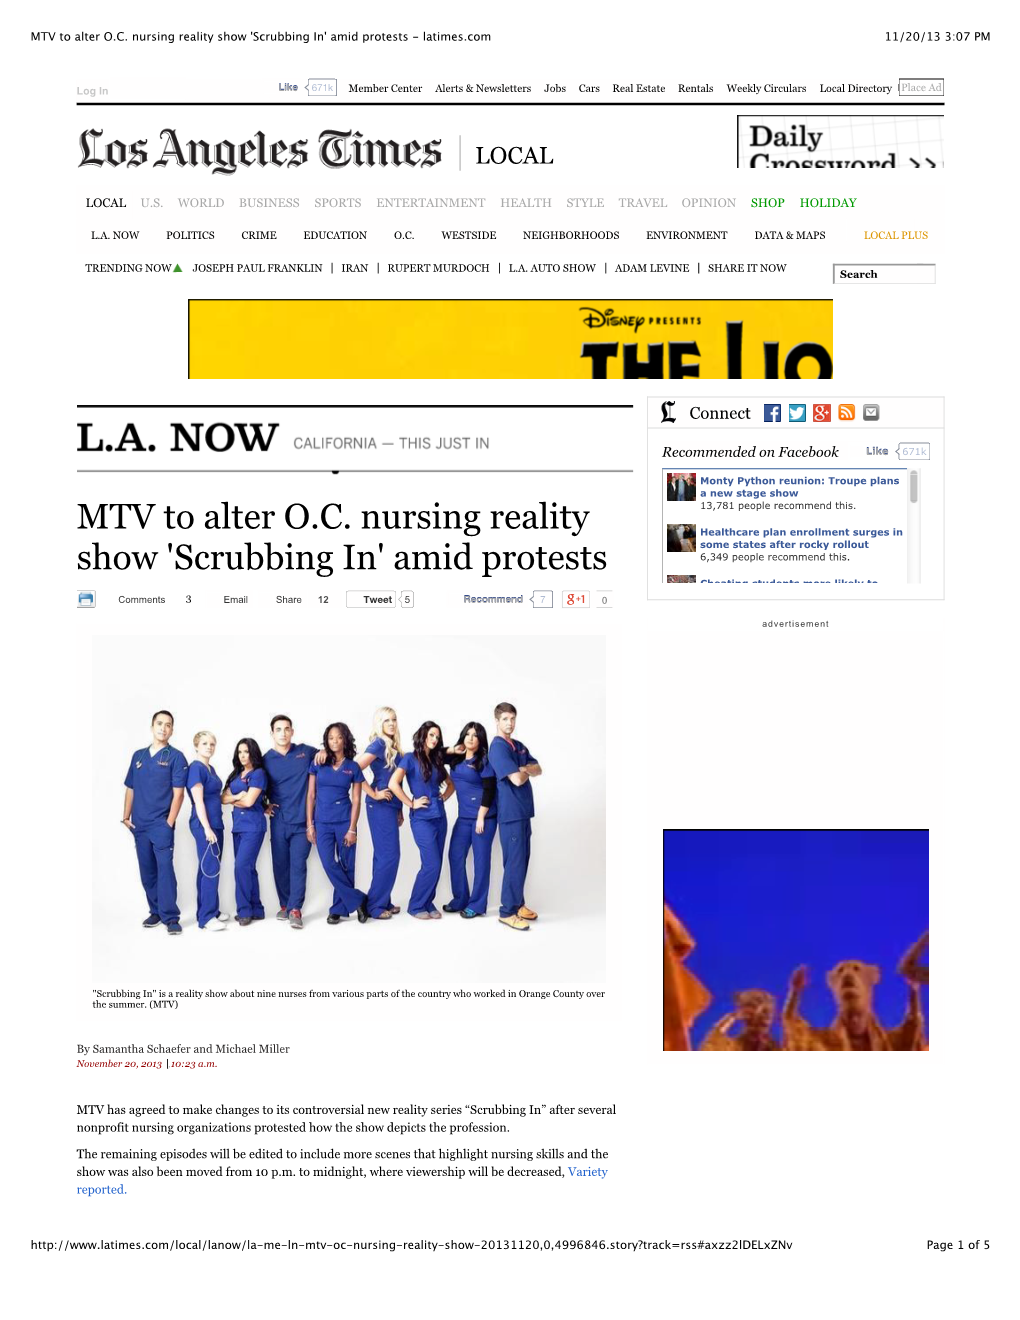 MTV to Alter O.C. Nursing Reality Show 'Scrubbing In' Amid Protests - Latimes.Com 11/20/13 3:07 PM